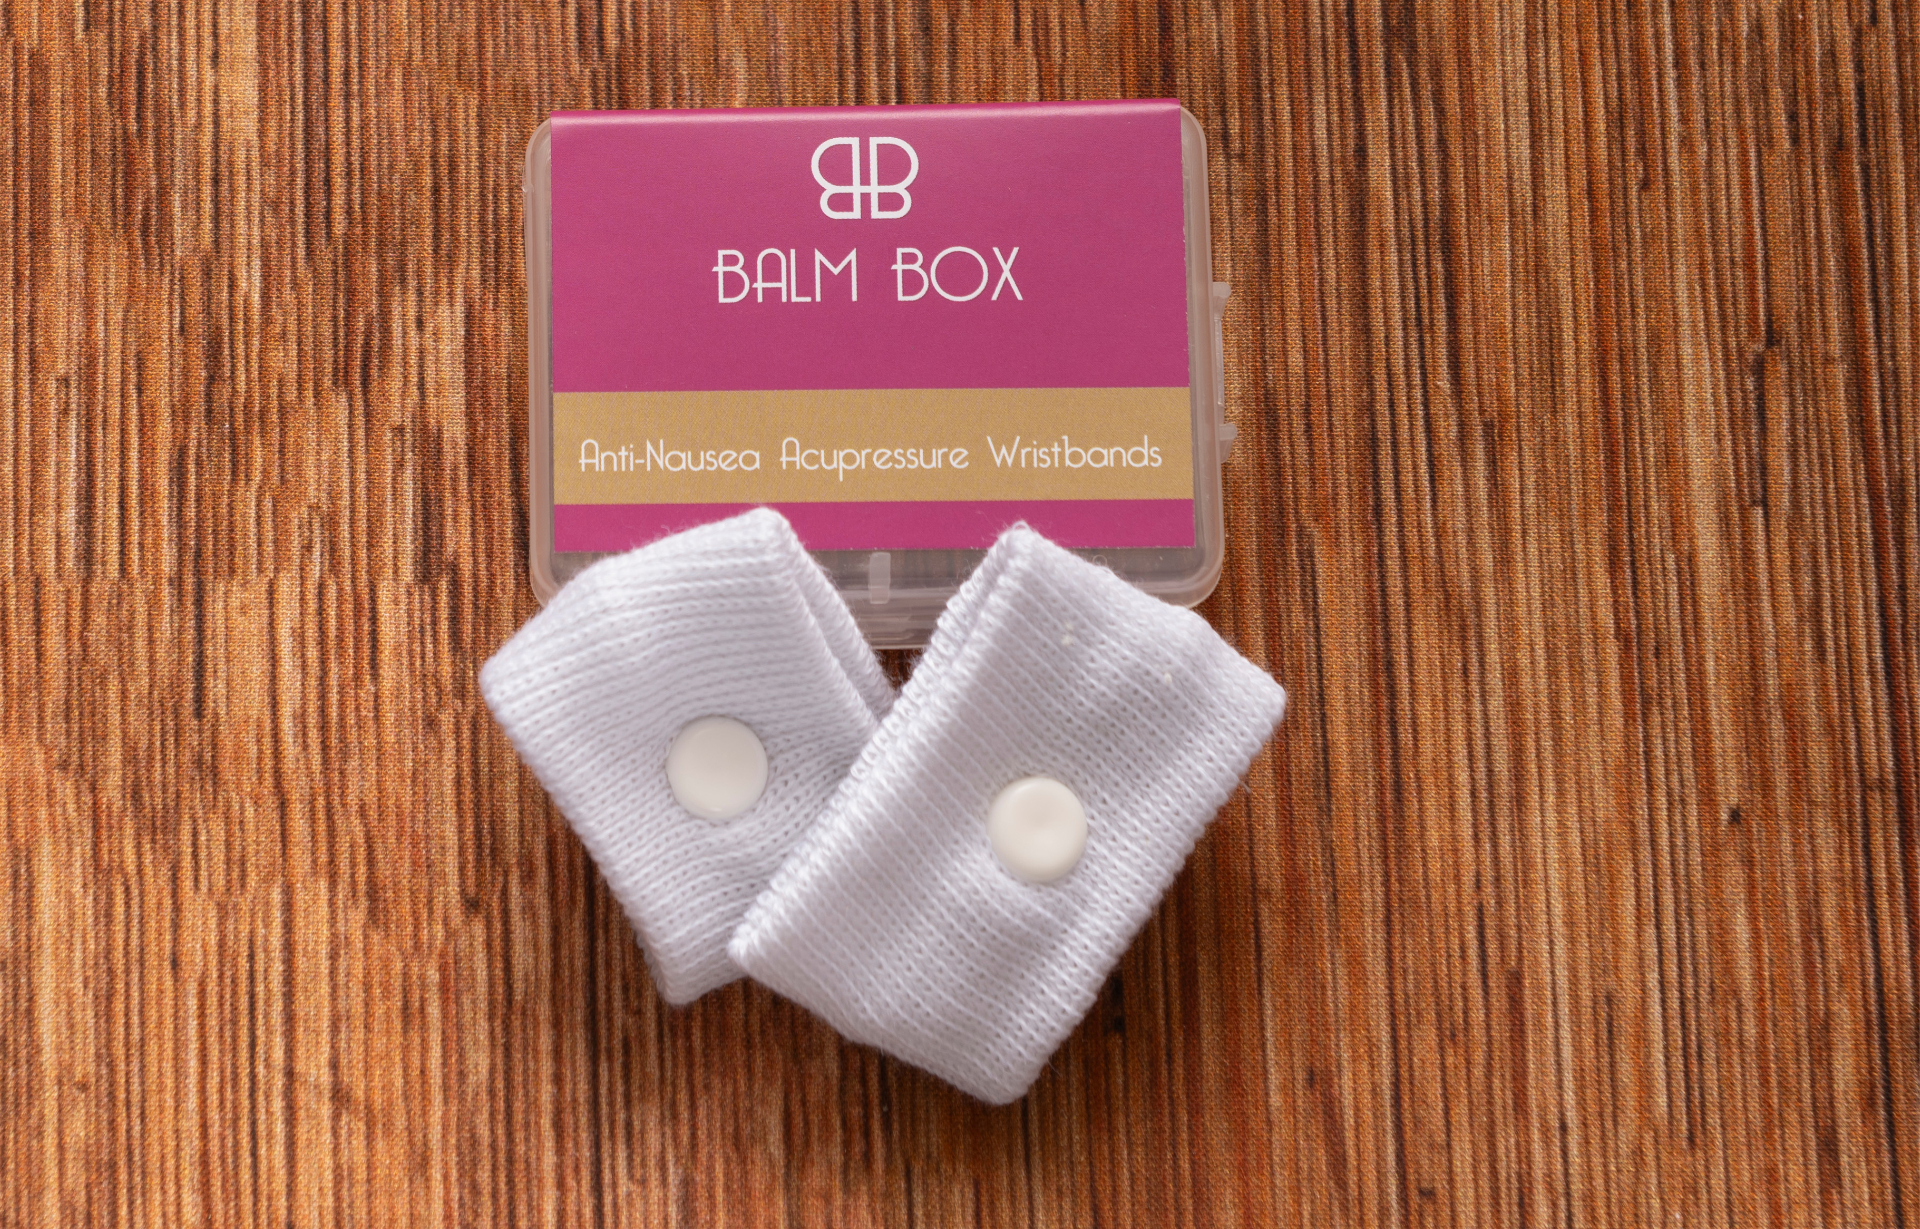 The BEST Cancer Care Gifts – The Balm Box